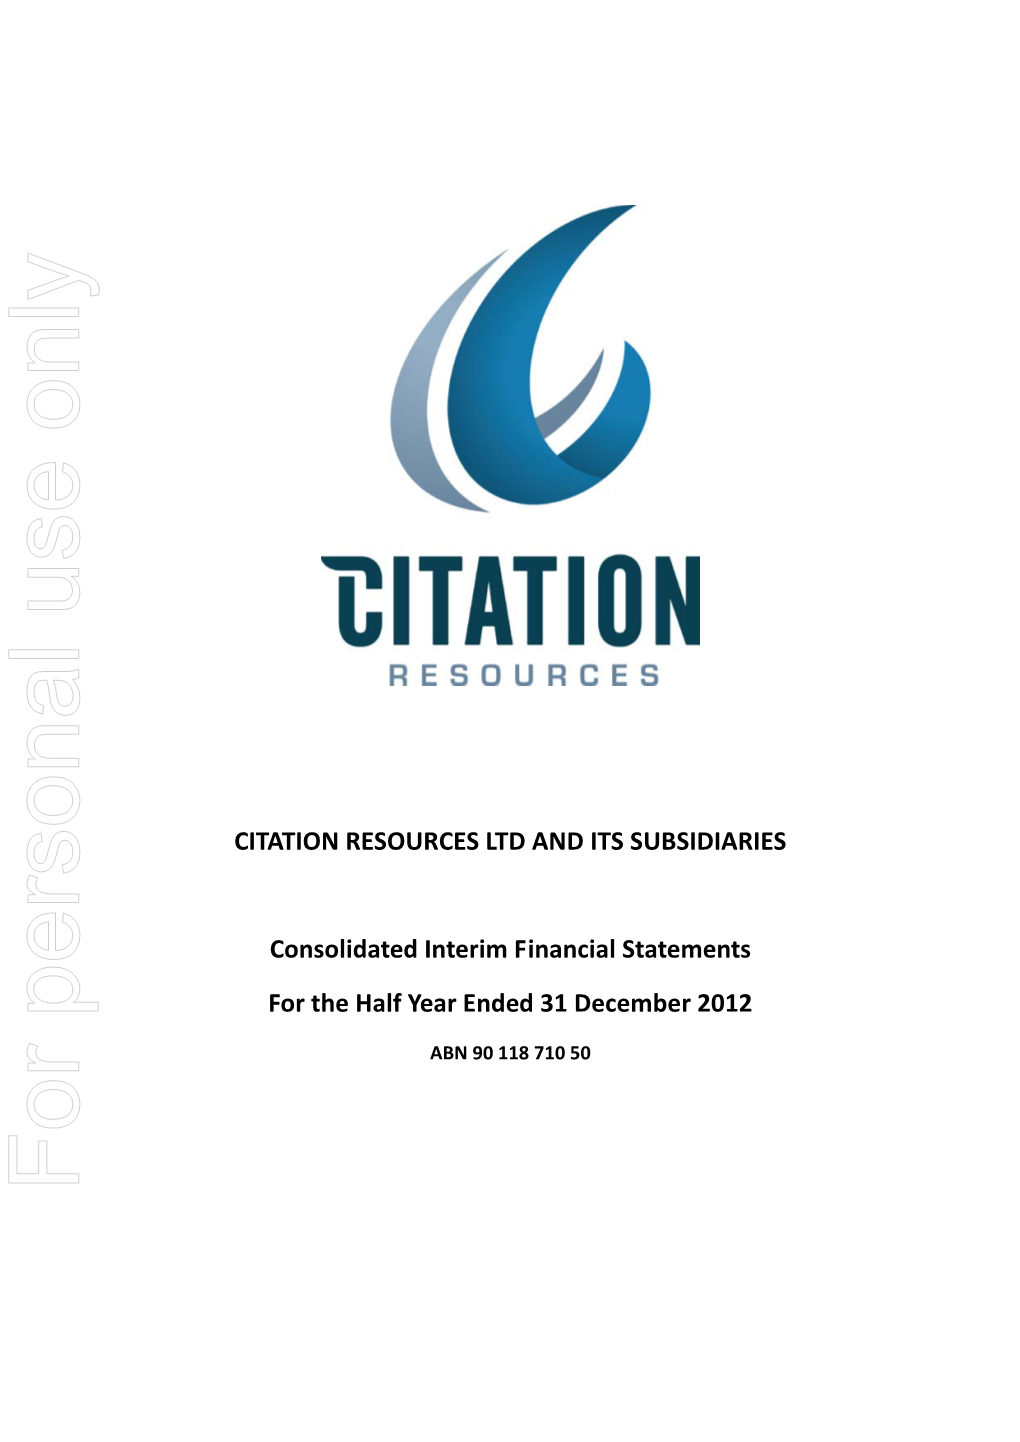 Citation Resources Ltd and Its Subsidiaries